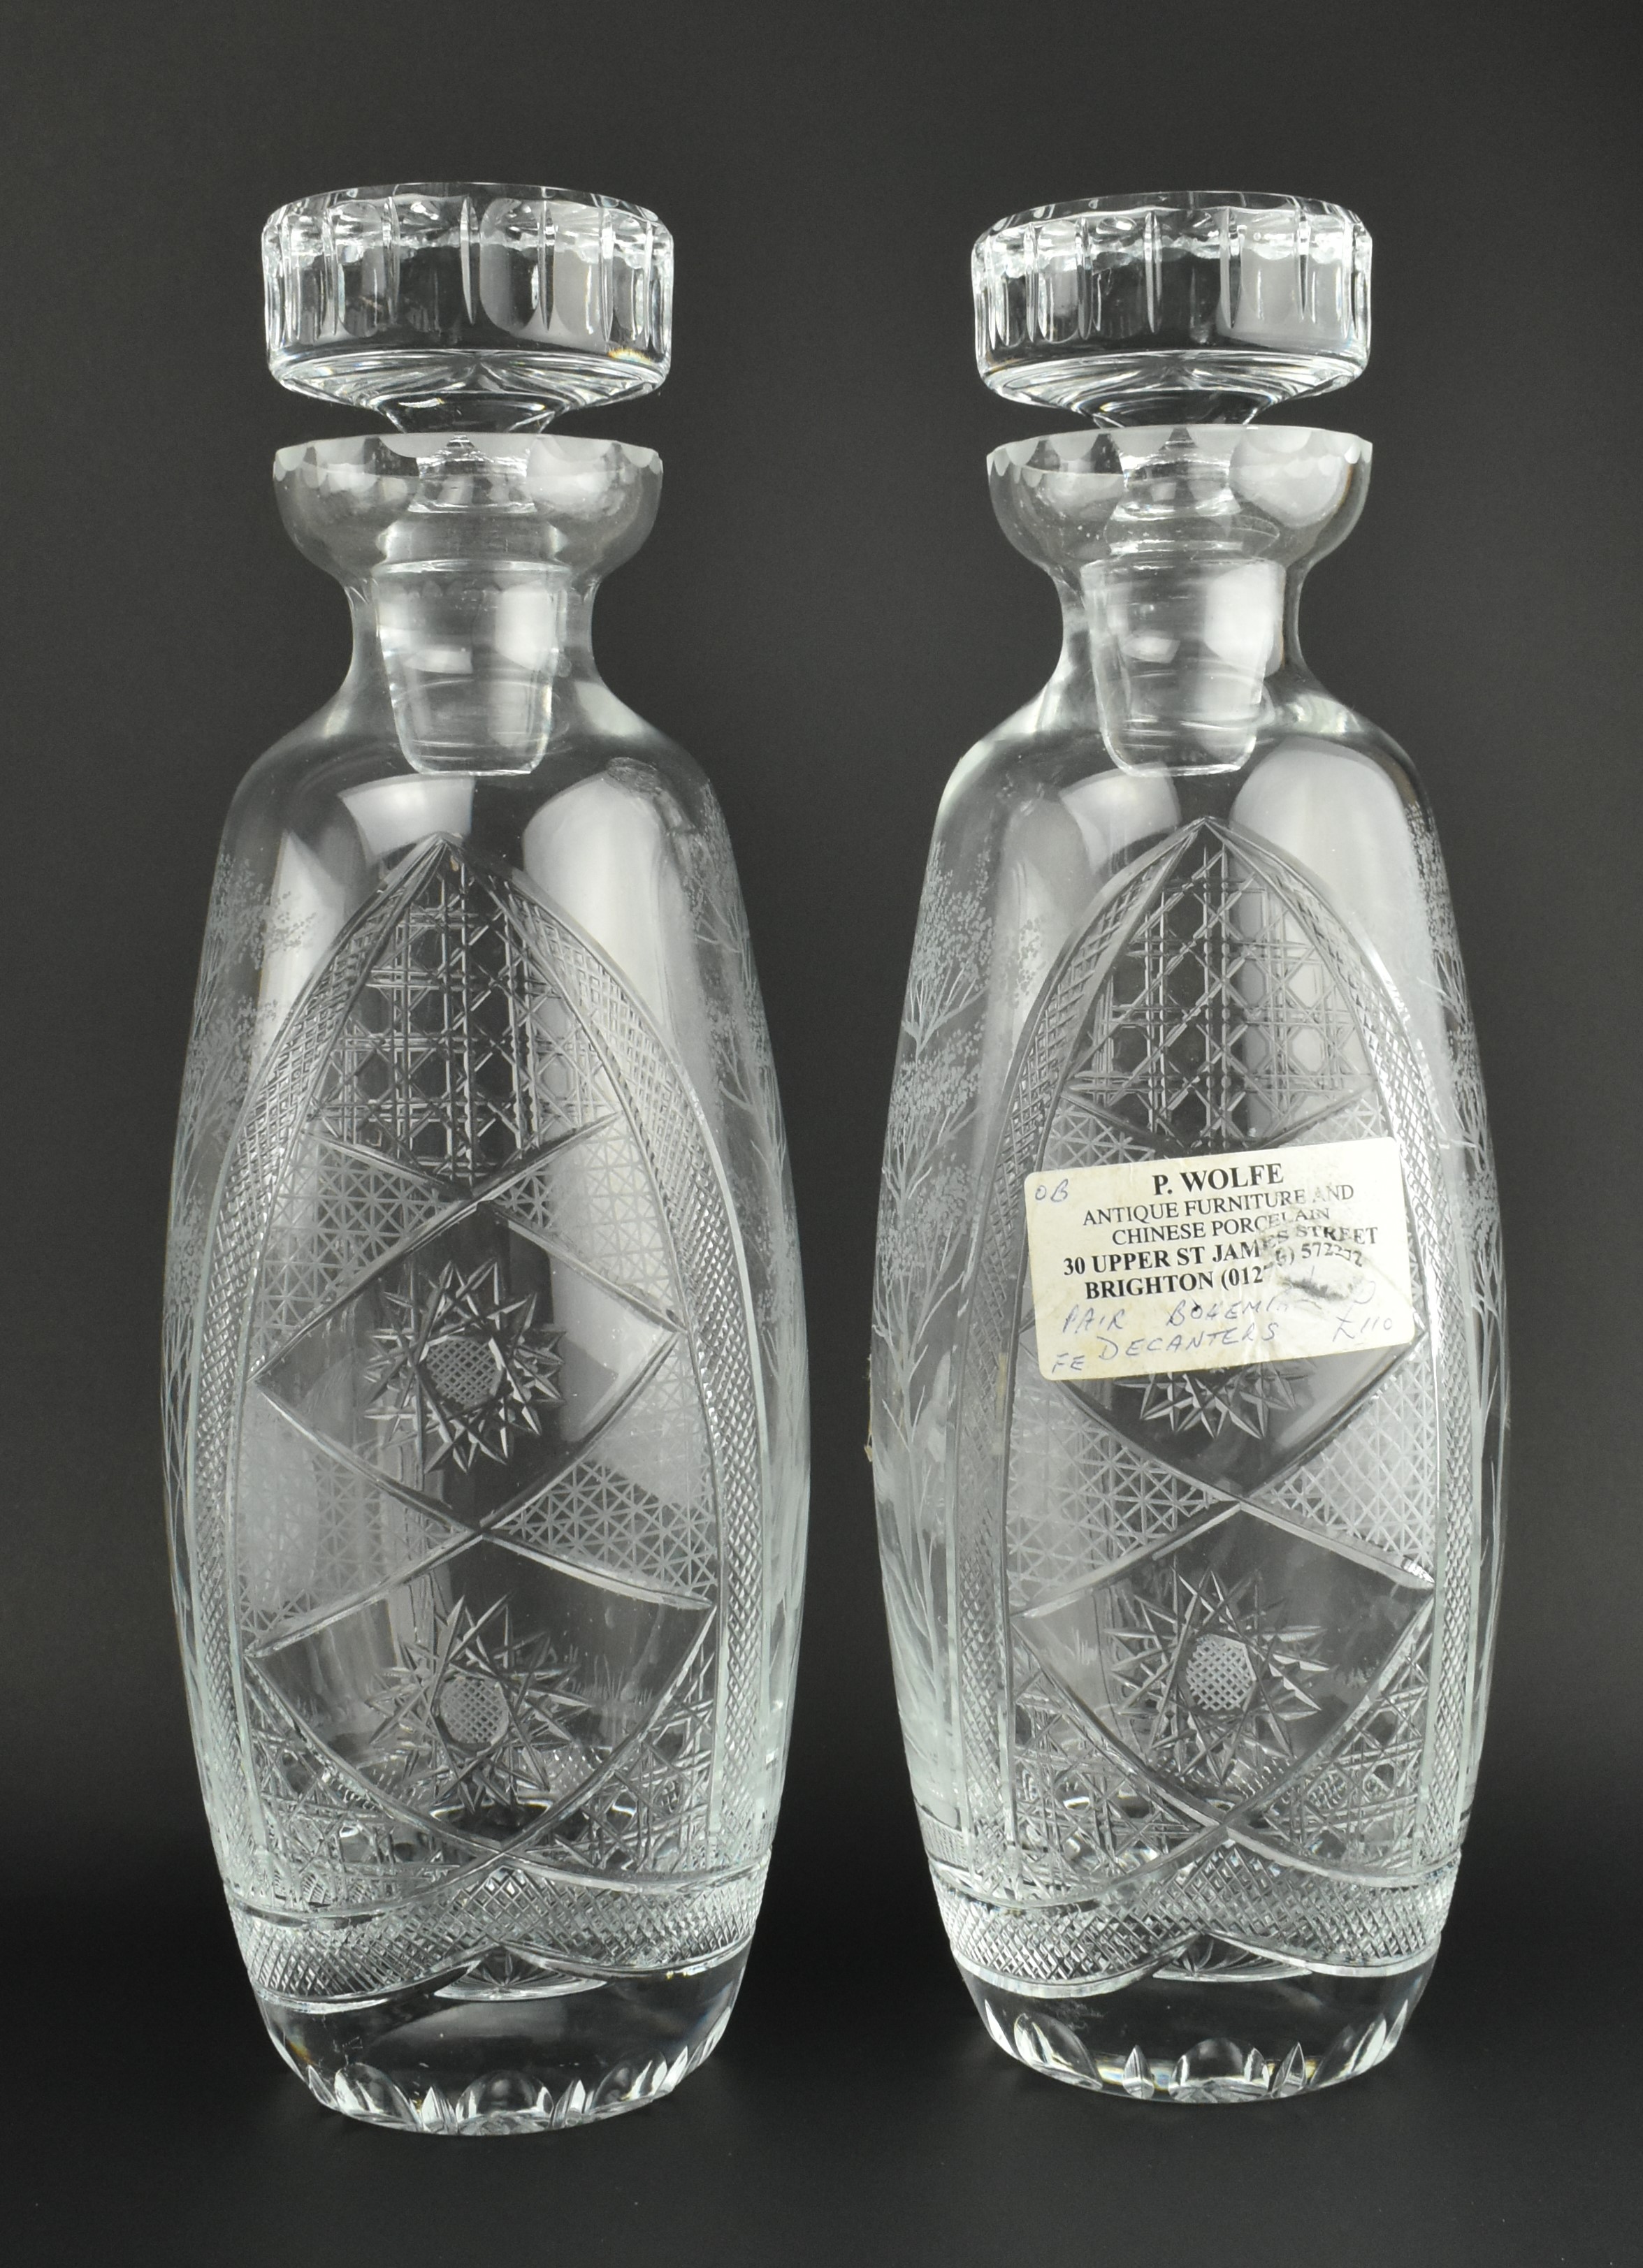 COLLECTION OF BOHEMIAN STYLE CUT GLASS INCL. PAIR DECANTERS - Image 3 of 8